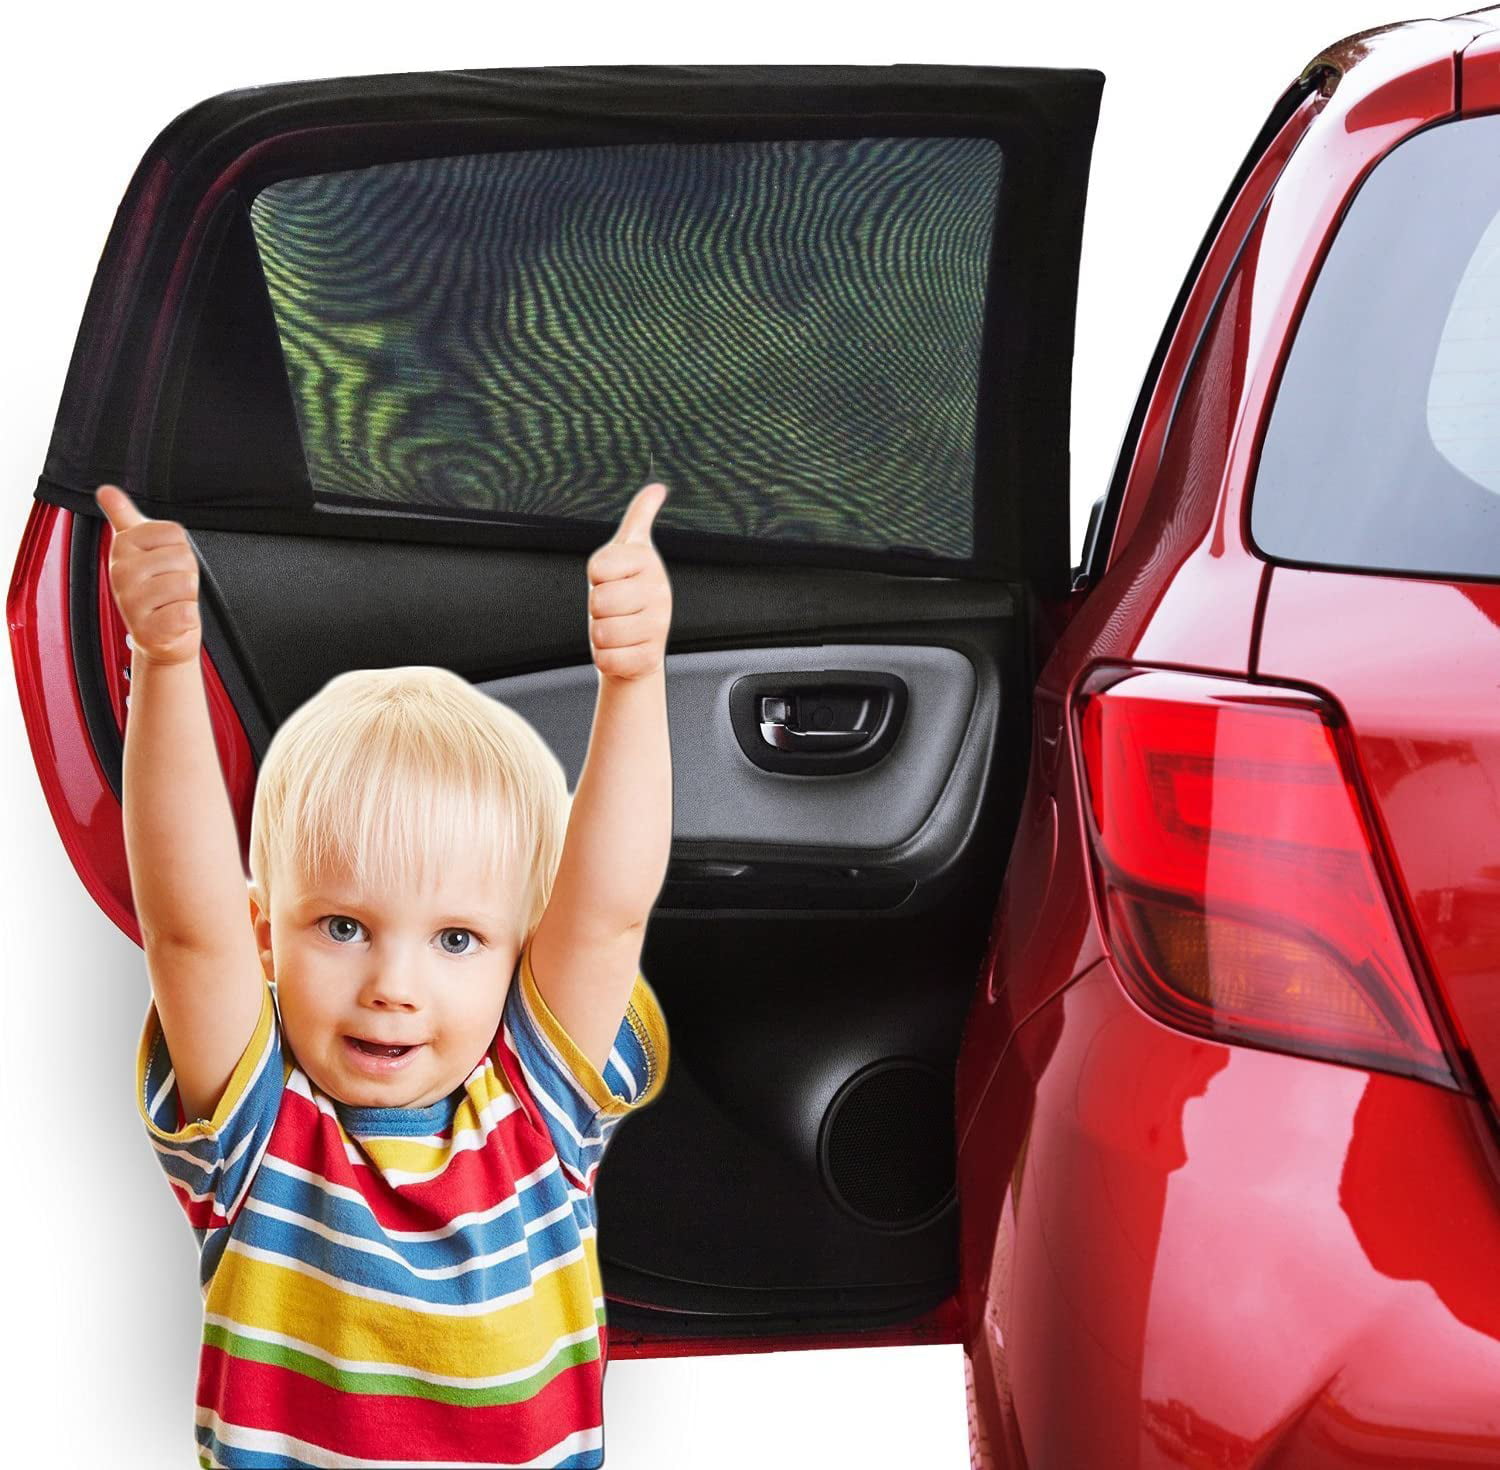 Auto Static Cling Sun shades Protector Pack of 2 Baby Car Window Sunshade 